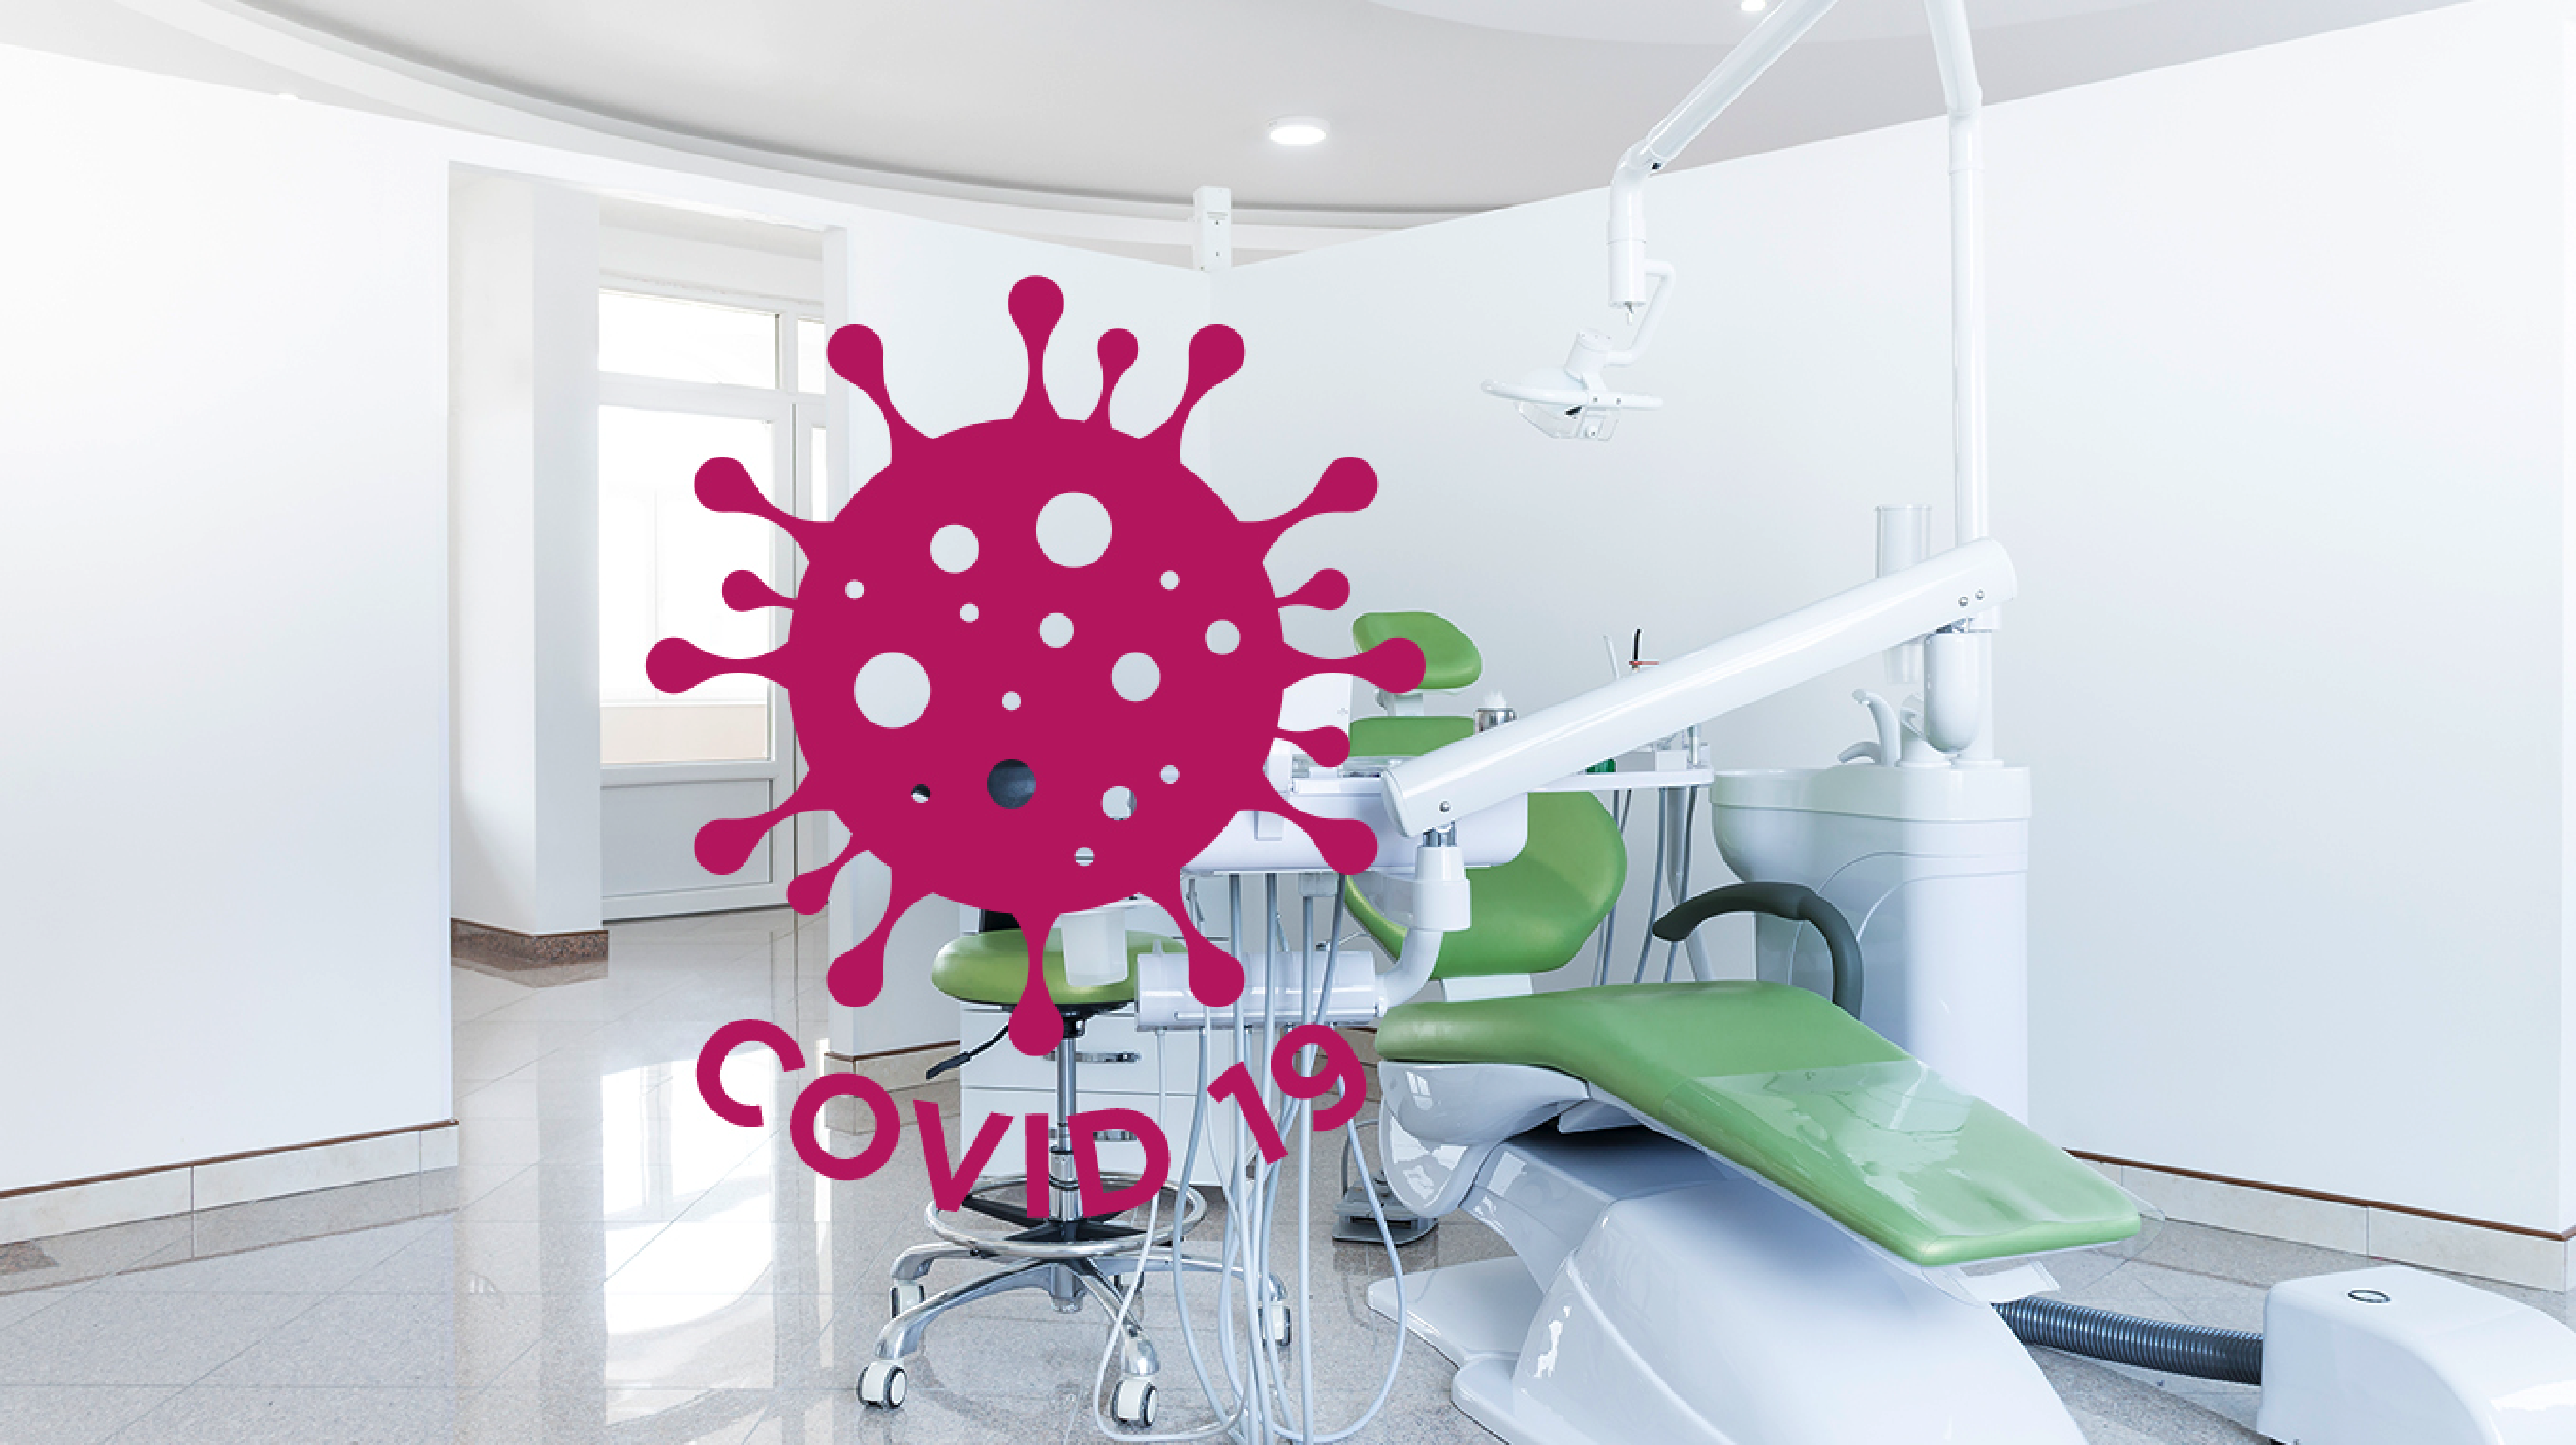 Oral Health in the Time of COVID-19